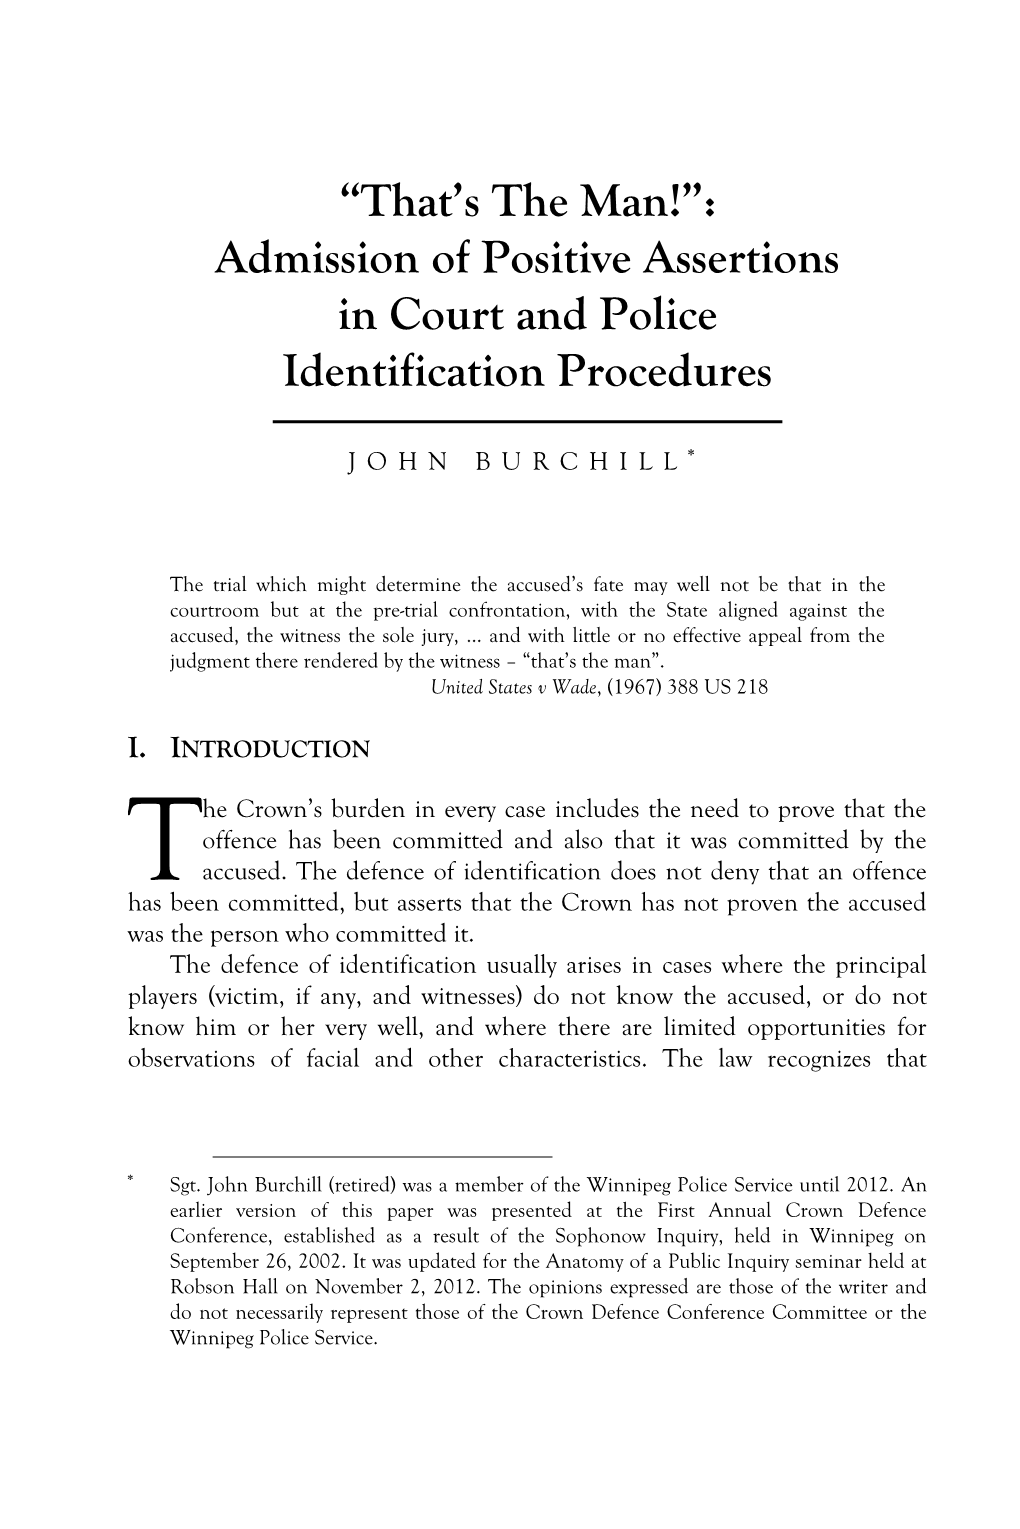 “That's the Man!”: Admission of Positive Assertions in Court and Police Identification Procedures